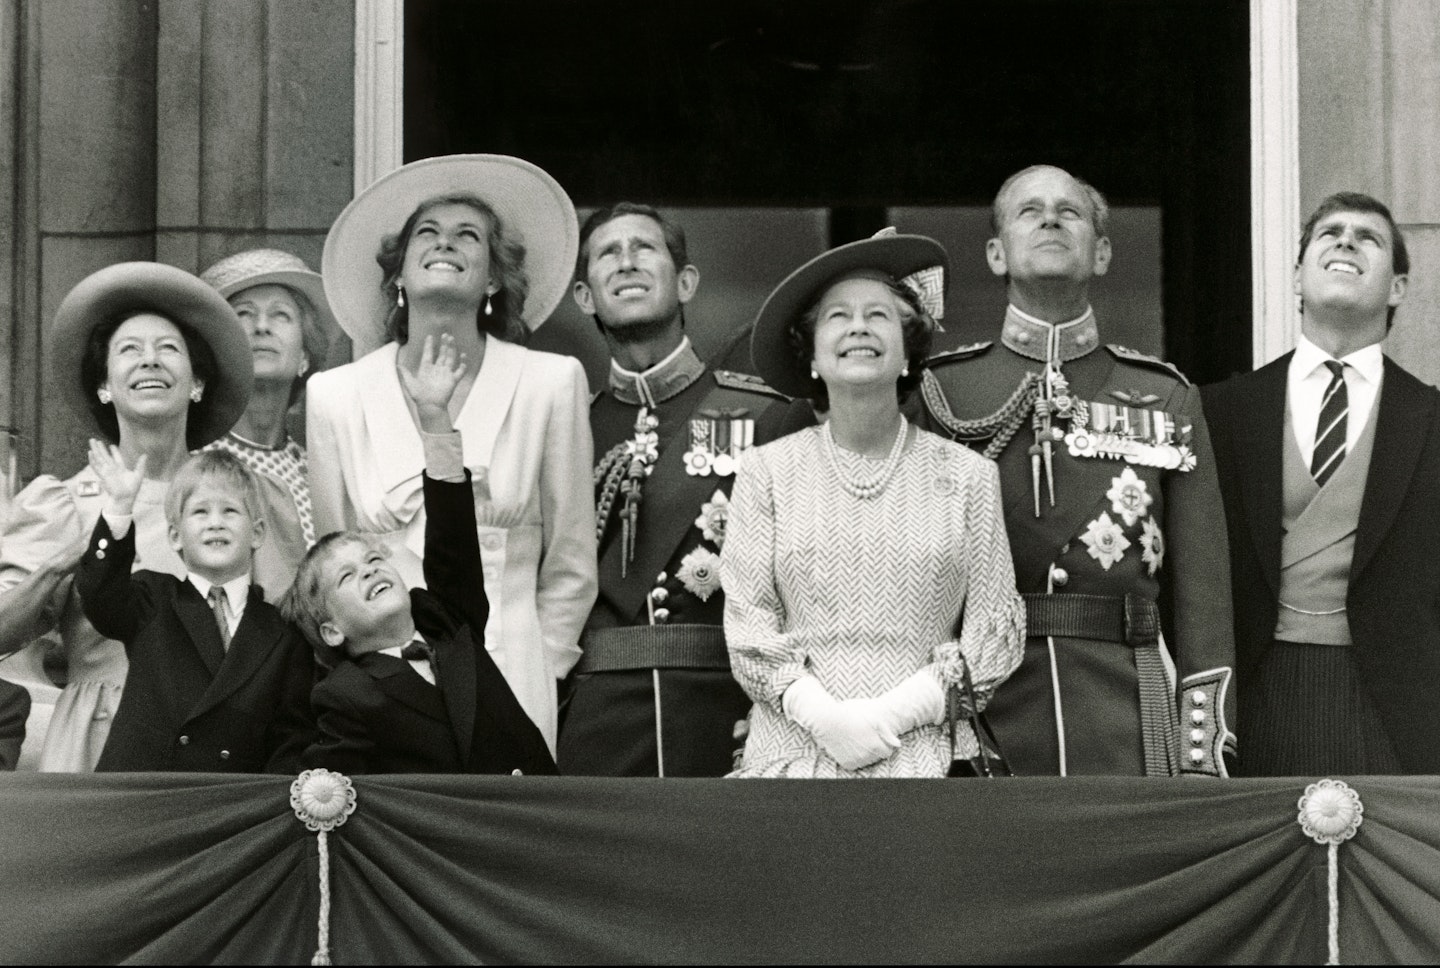 watching a flypast from a balcony at Buckingham Palace to mark the Queens birthday in October 1989.